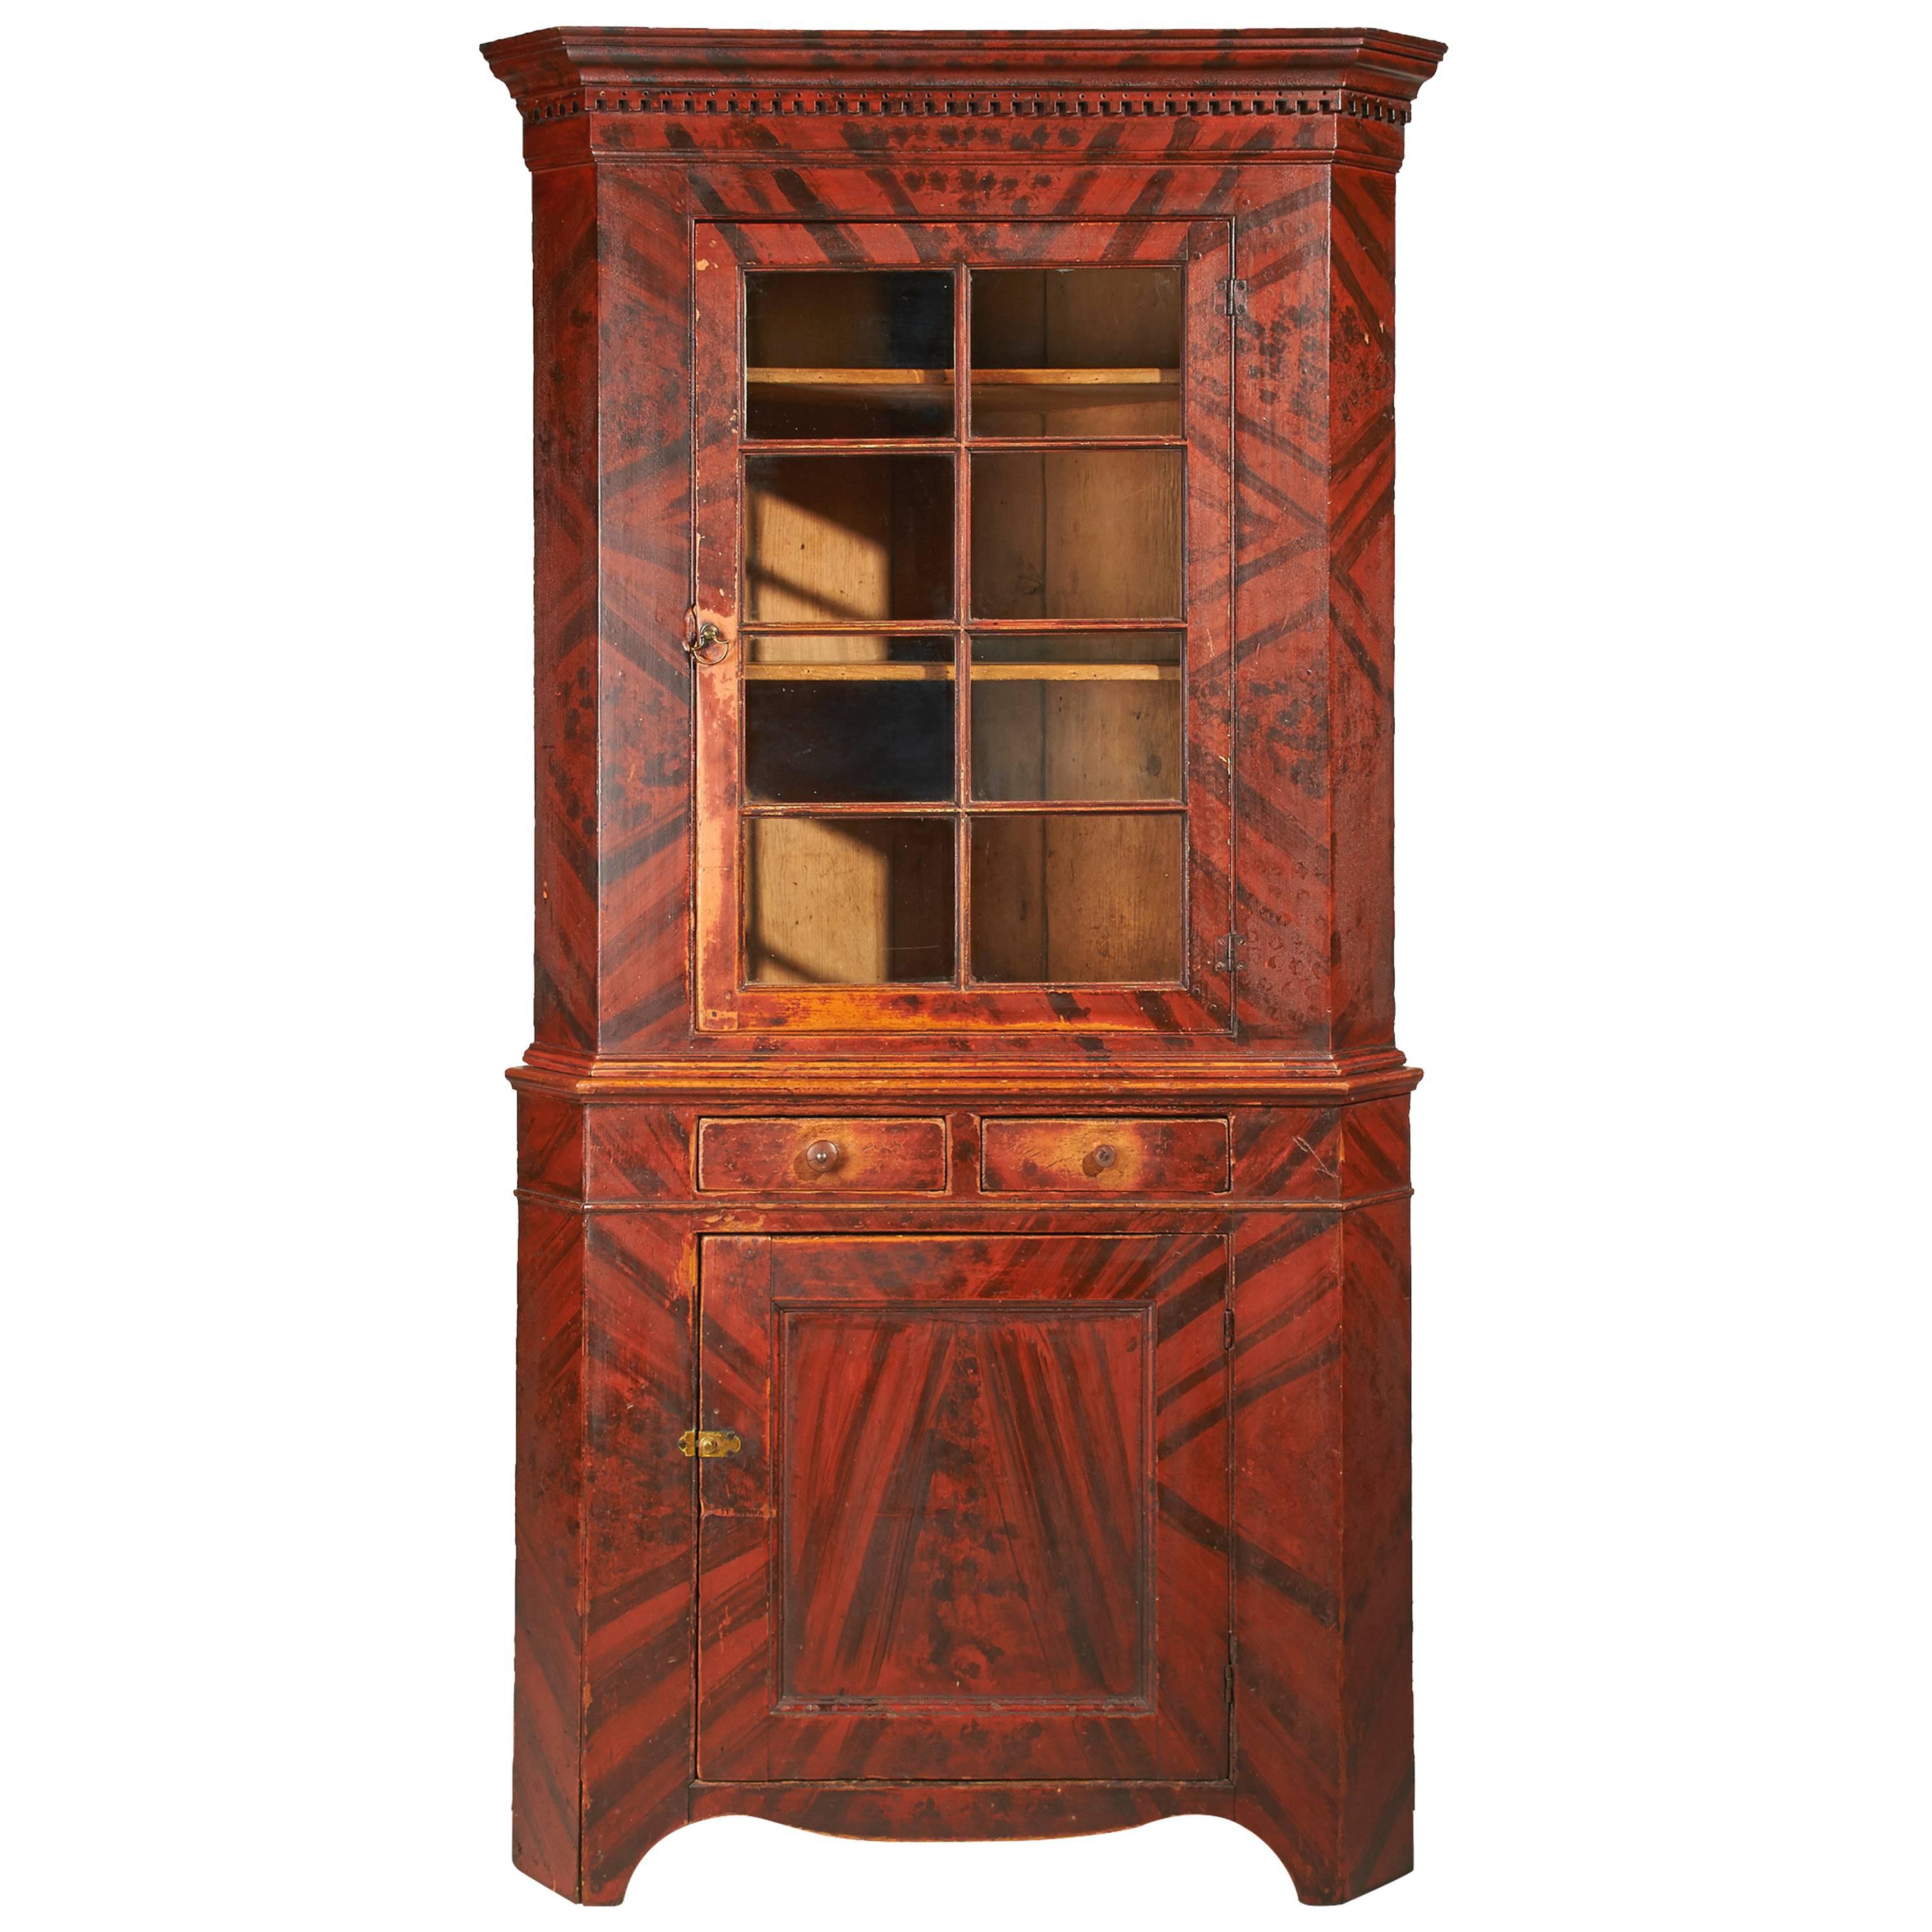 Pennsylvania Corner Cupboard with Red and Black Grain Decoration